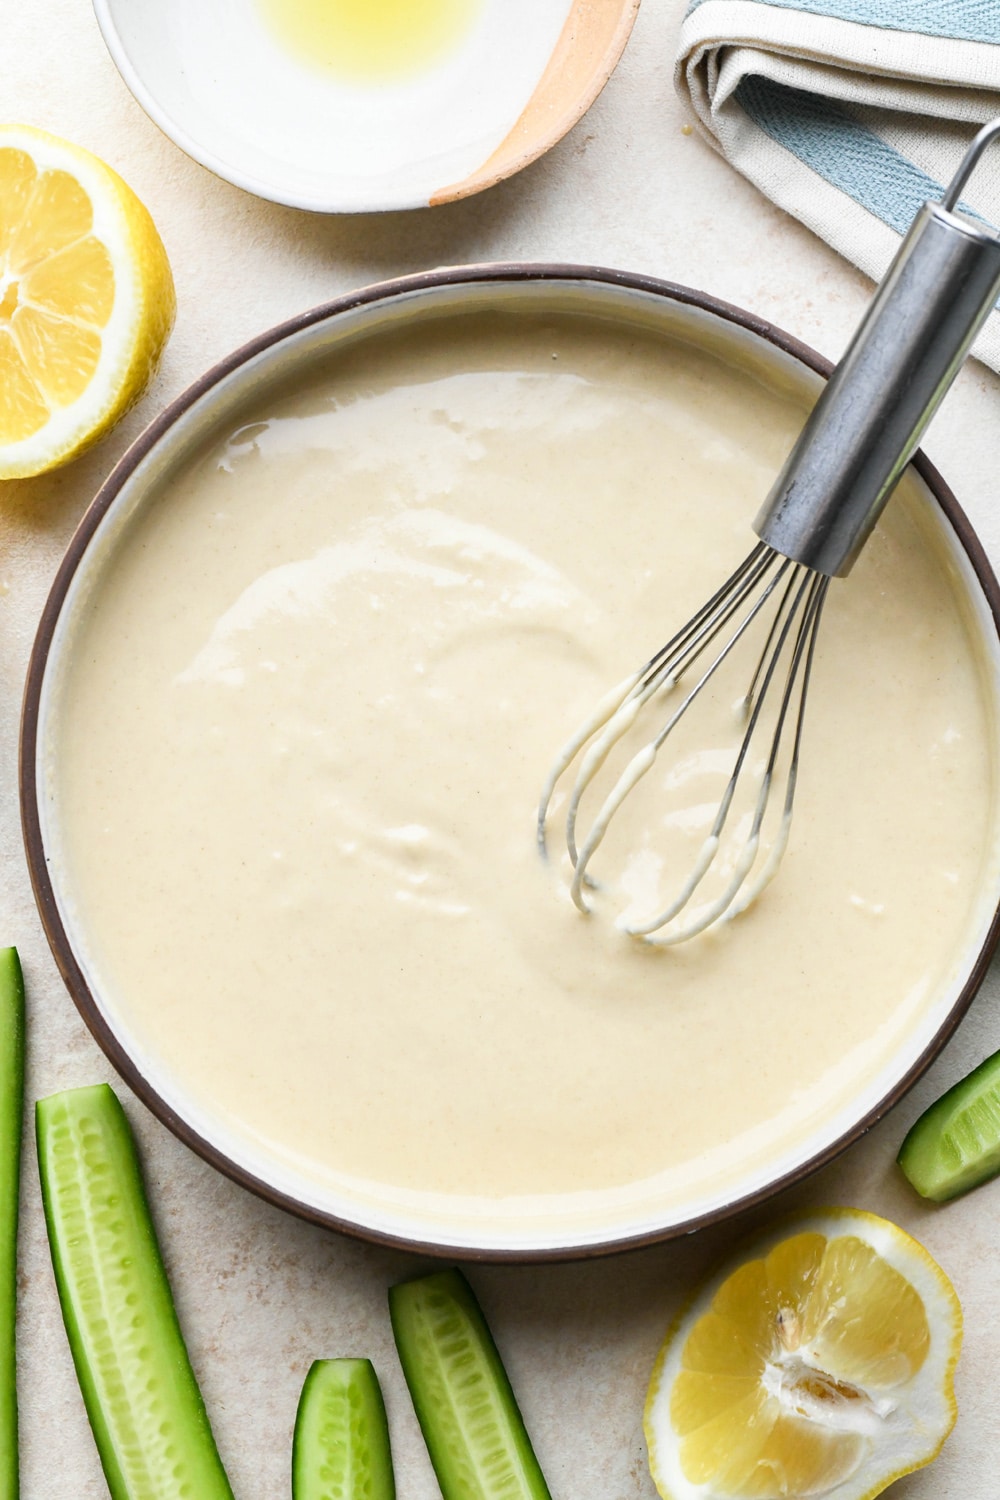 Creamy tahini dressing in a shallow bowl with a small whisk, surrounded by some cut cucumbers and lemons.